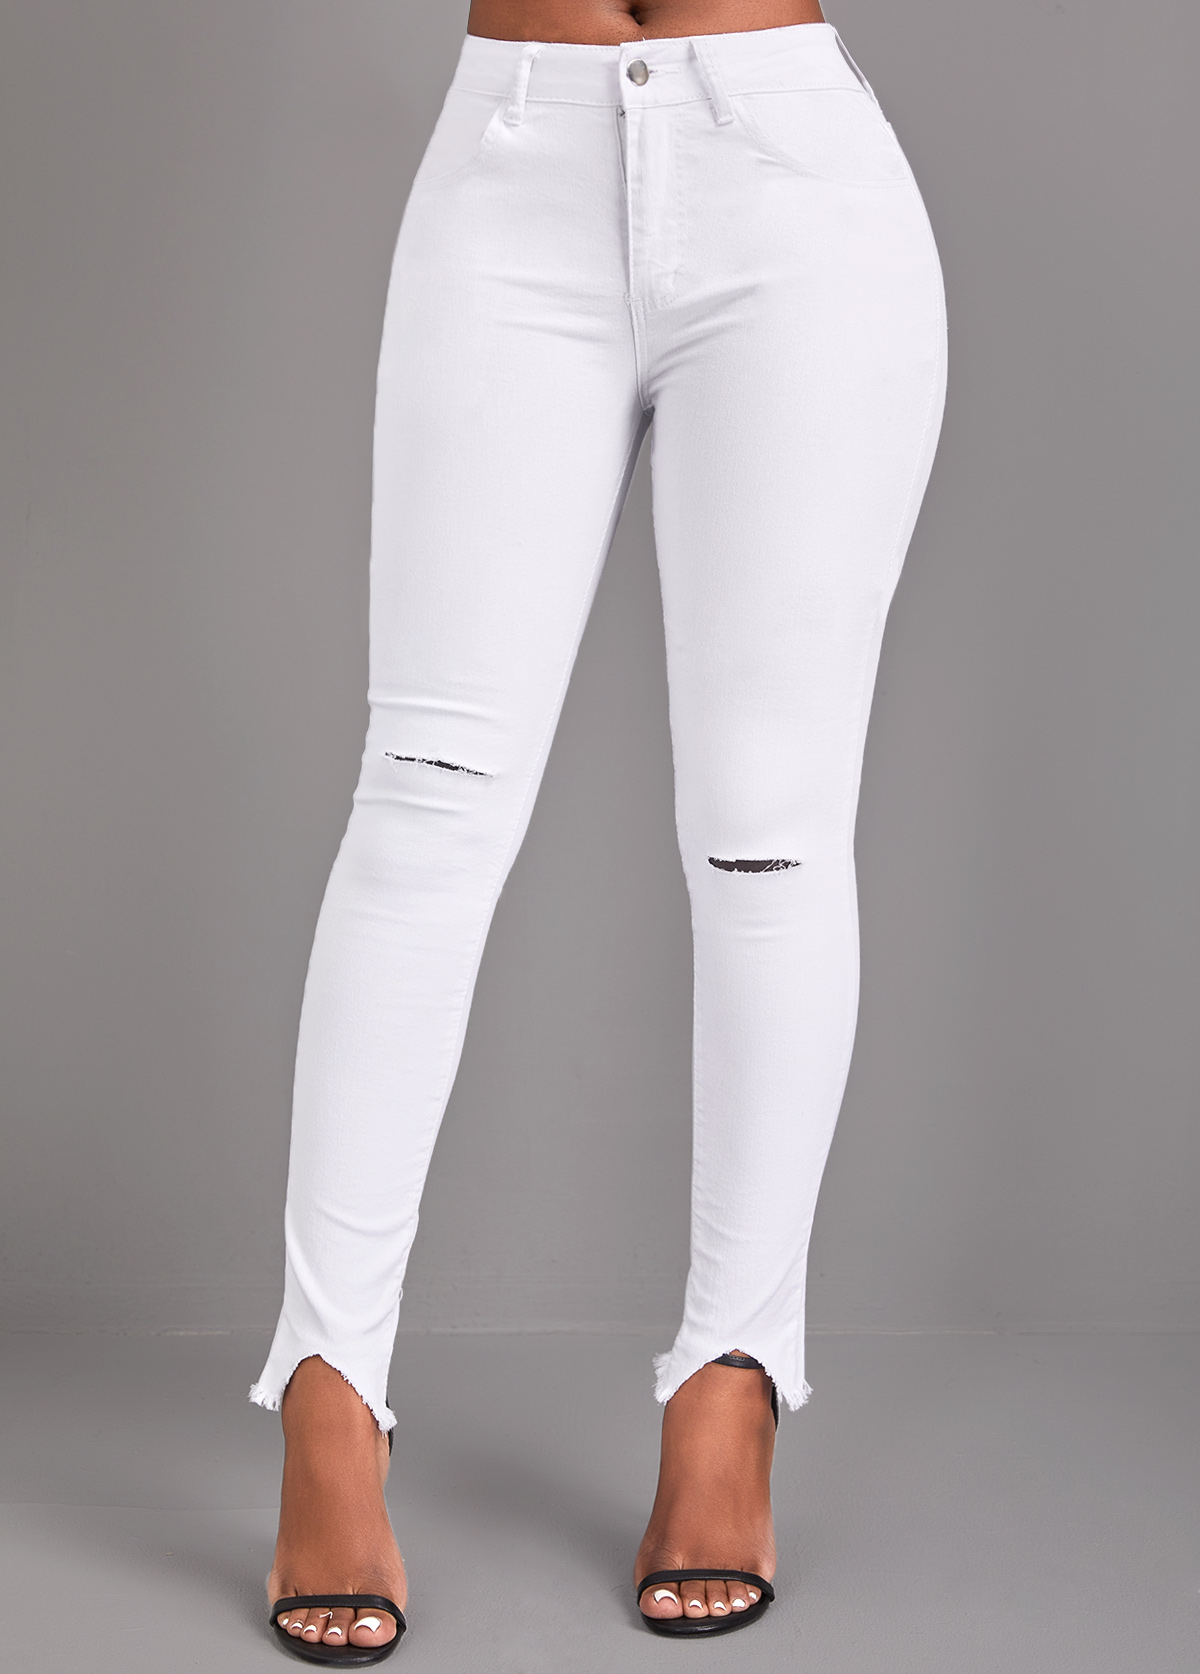 White Button Skinny High Waisted Jeans